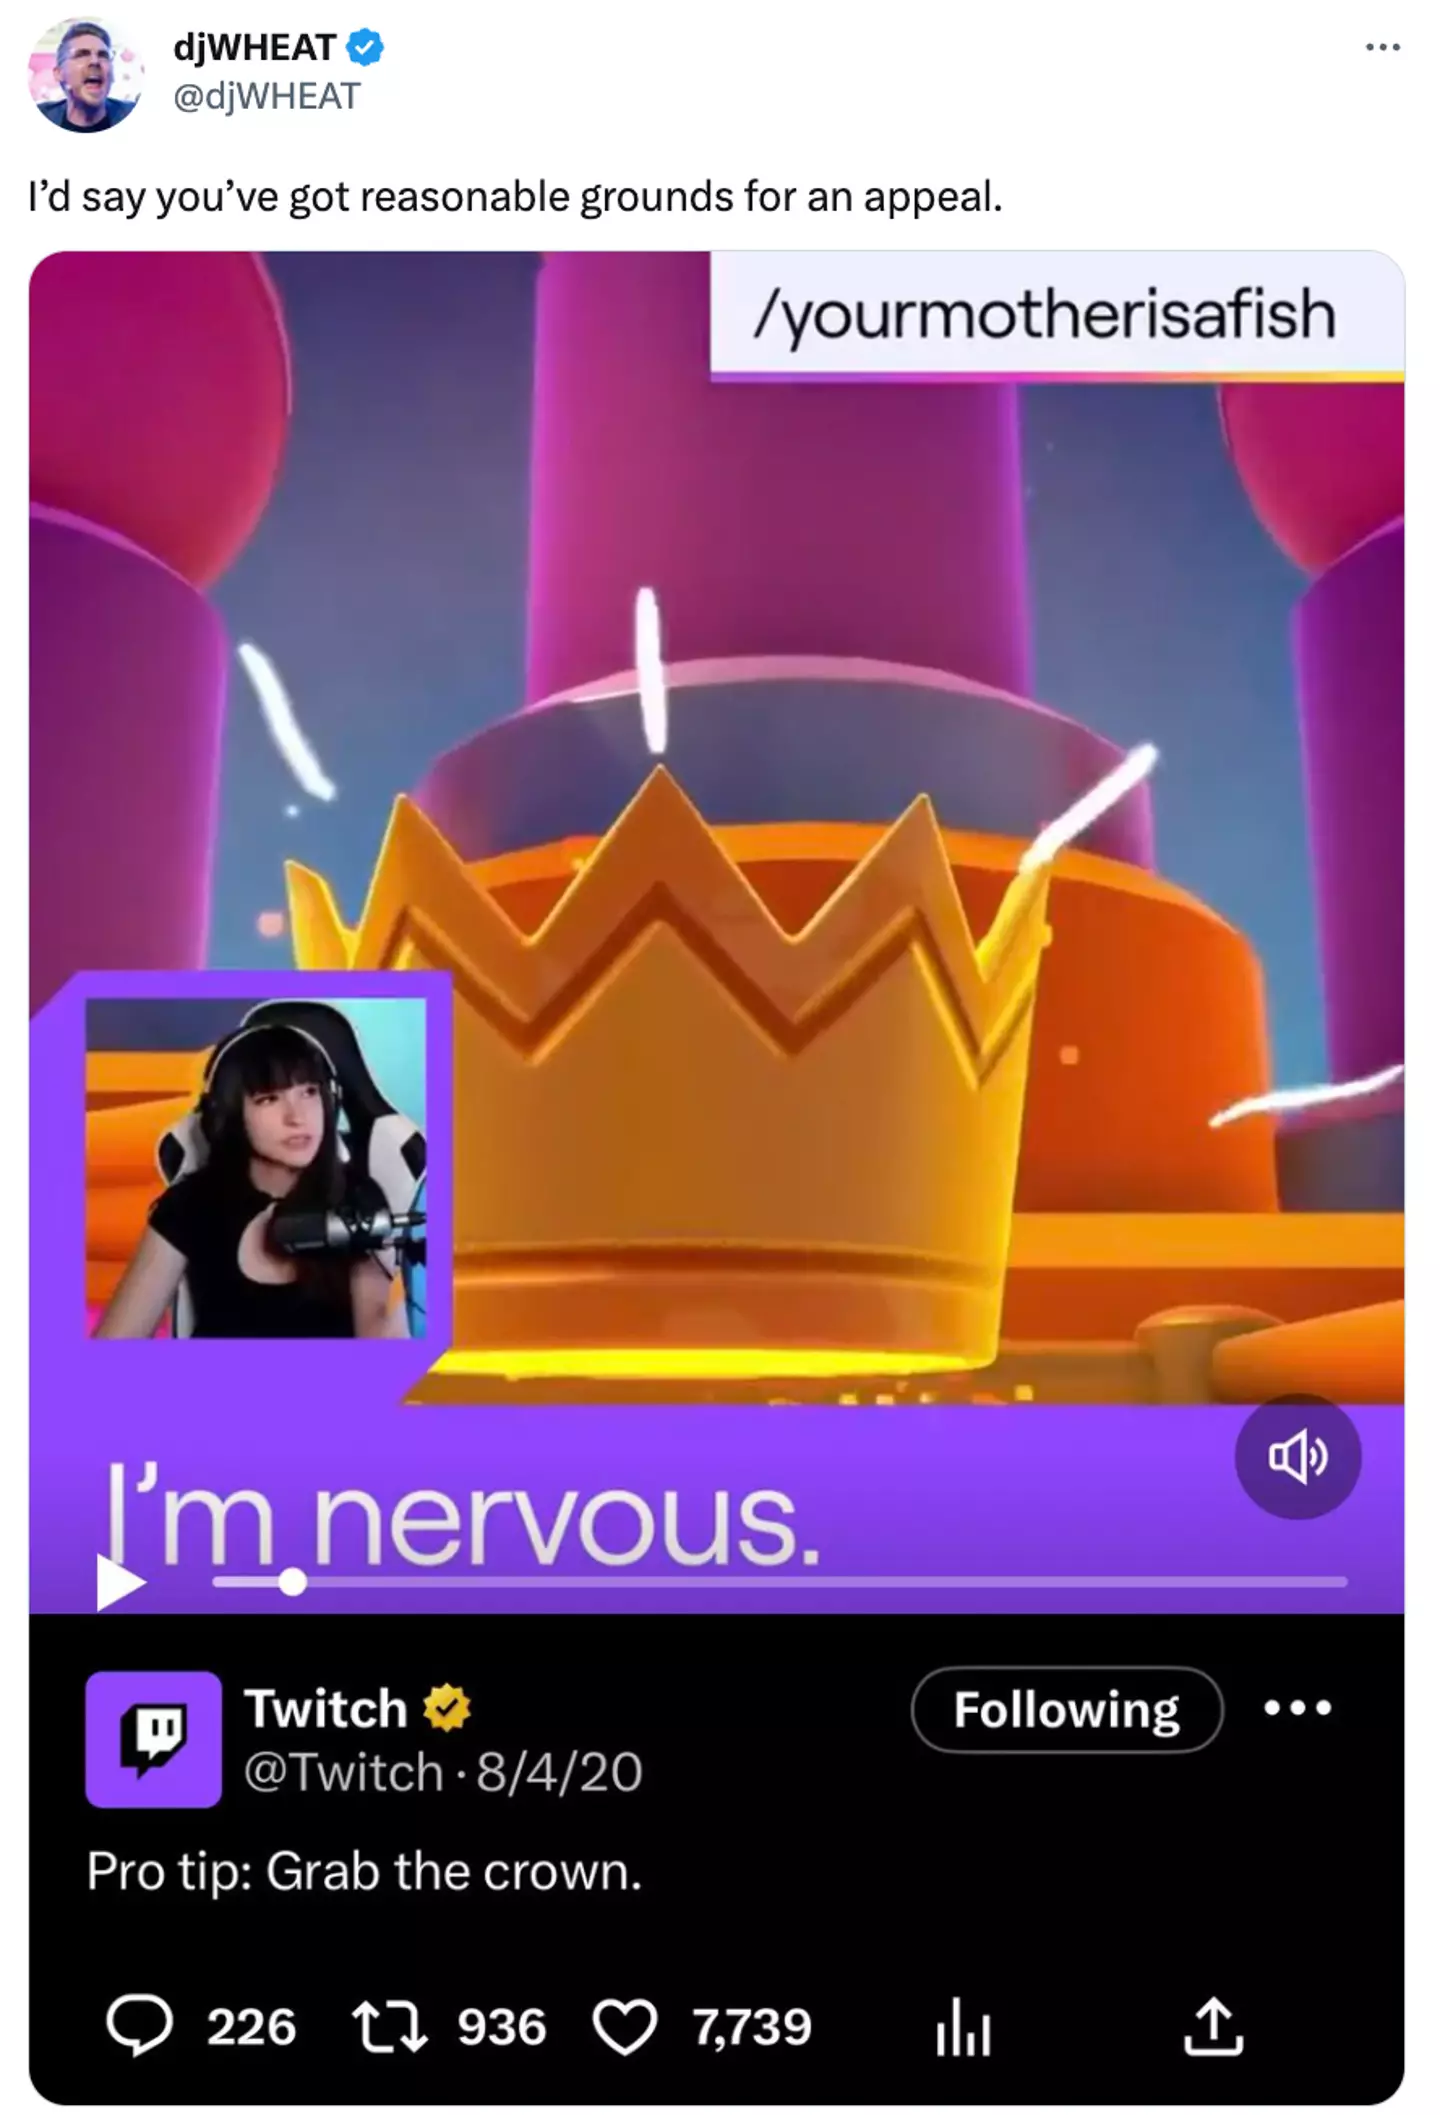 Fish's content had previously been used as promotional material by Twitch.